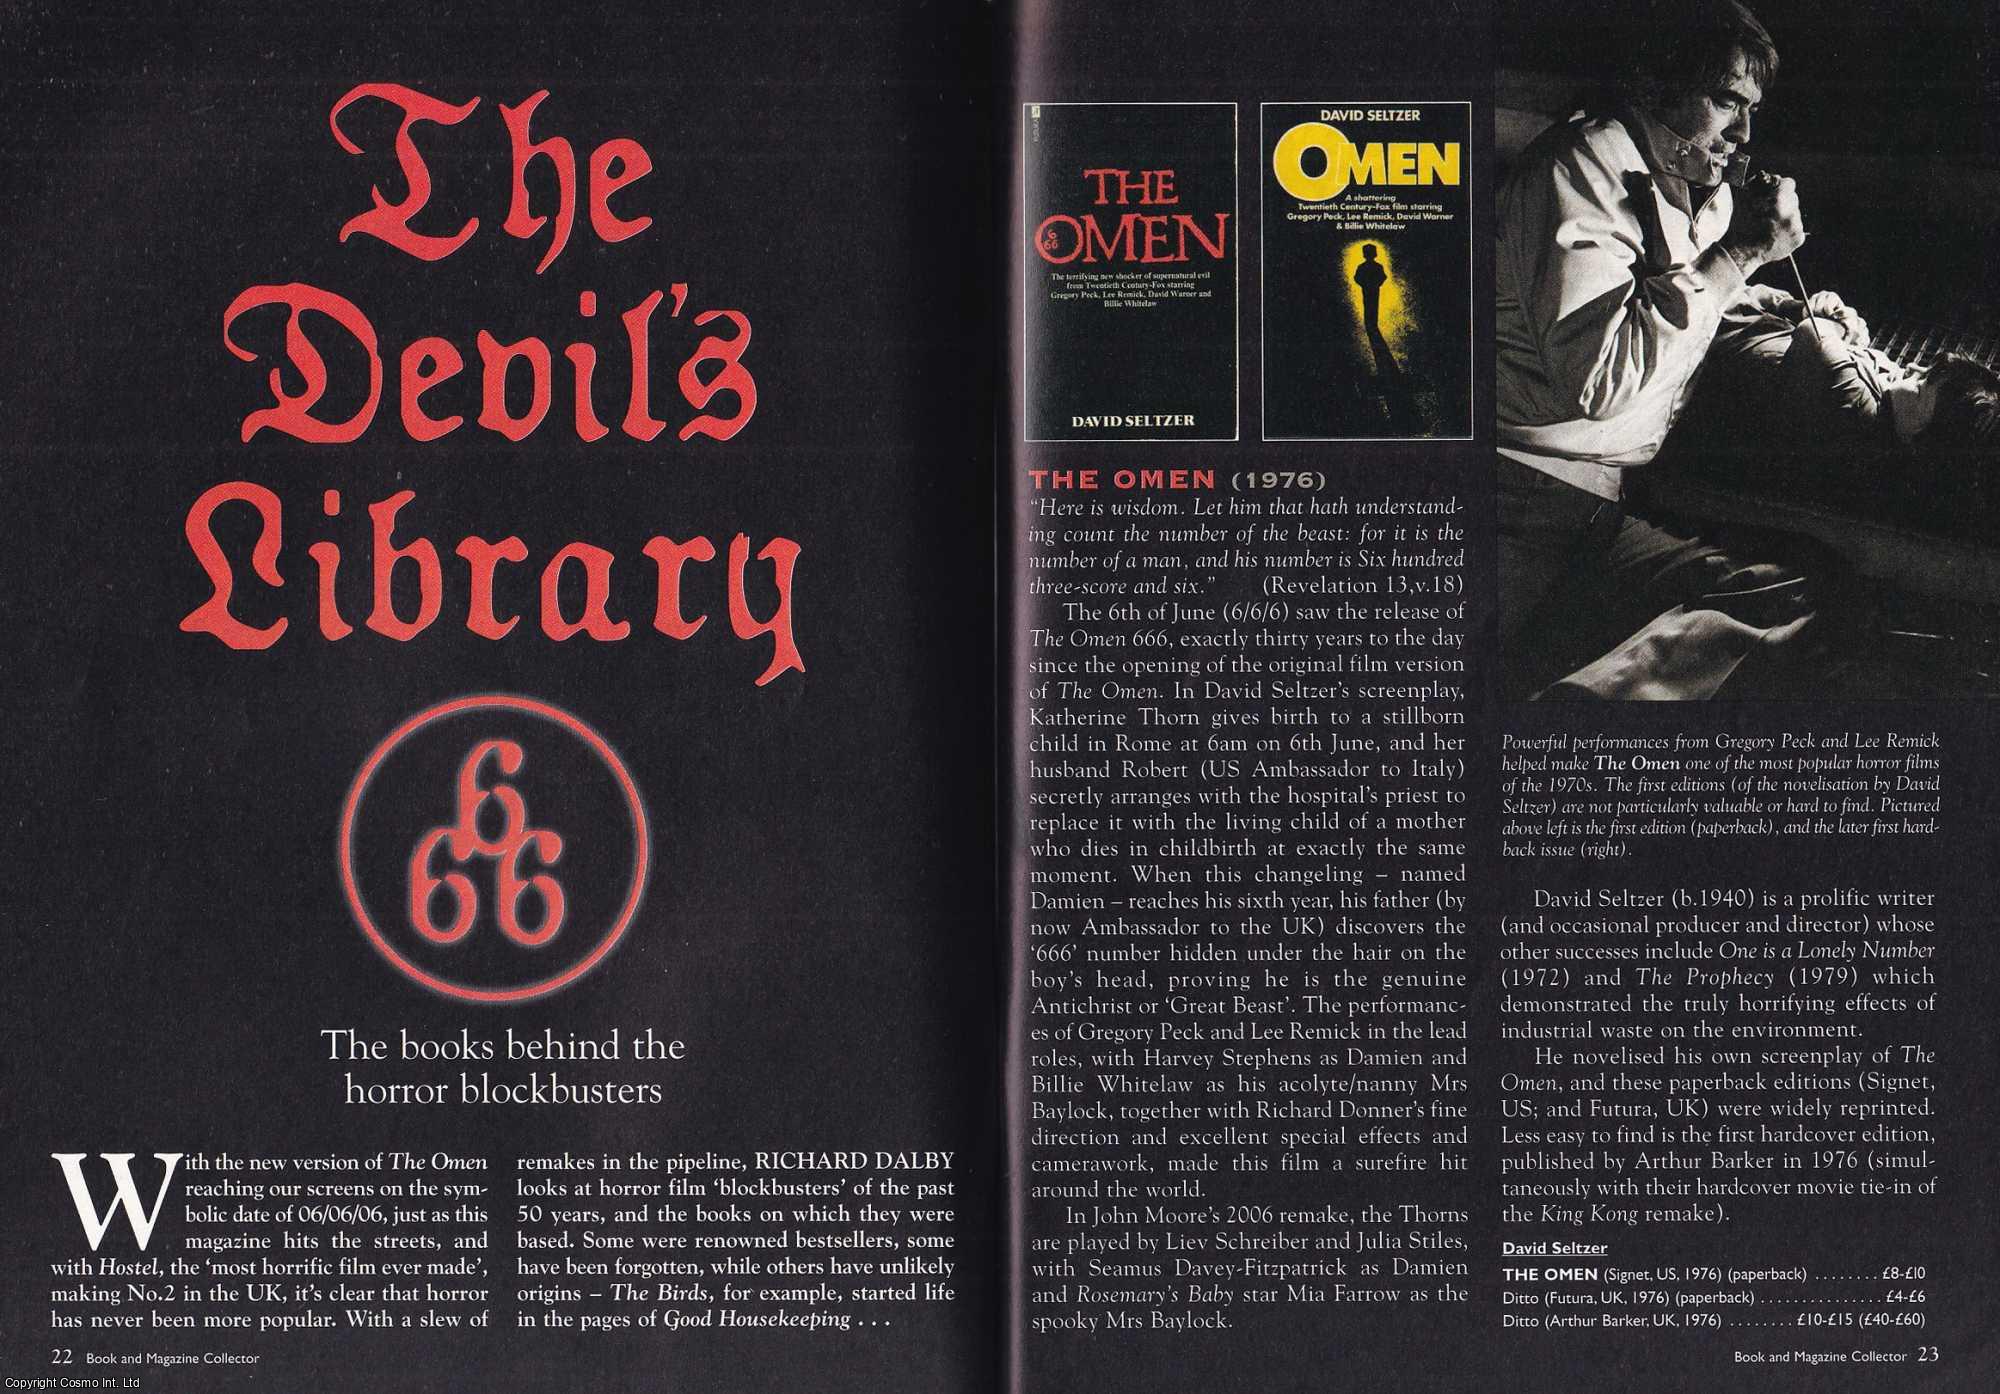 --- - The Devil's Library 666. The Books Behind The Blockbusters. This is an original article separated from an issue of The Book & Magazine Collector publication.